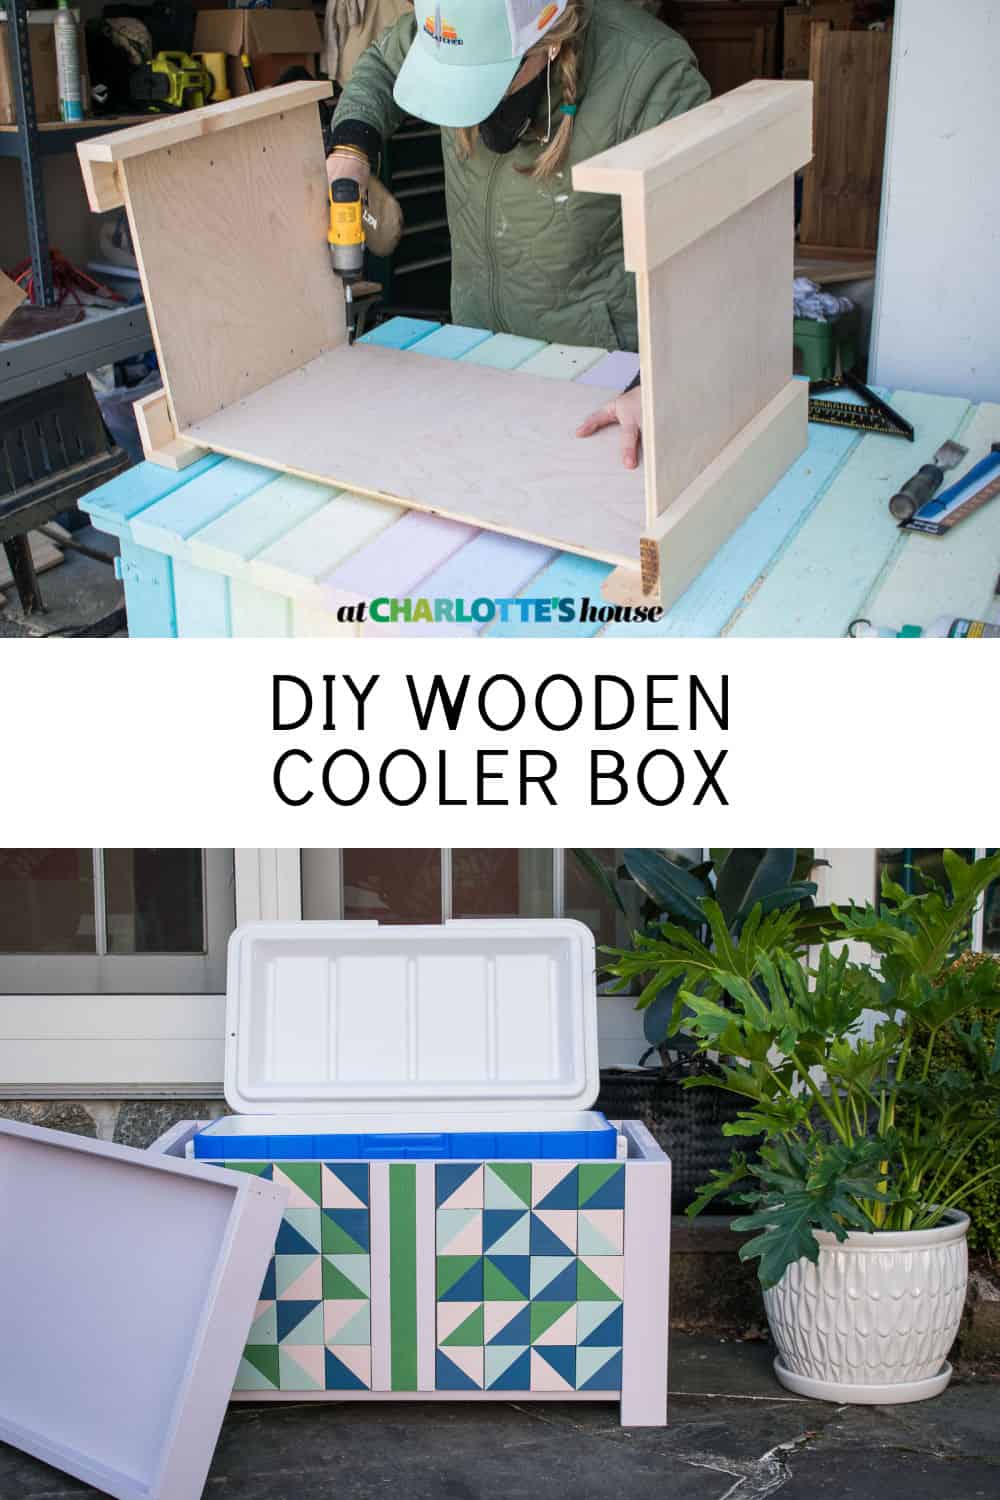 How to Build a Colorful Wooden Cooler Box - At Charlotte's House